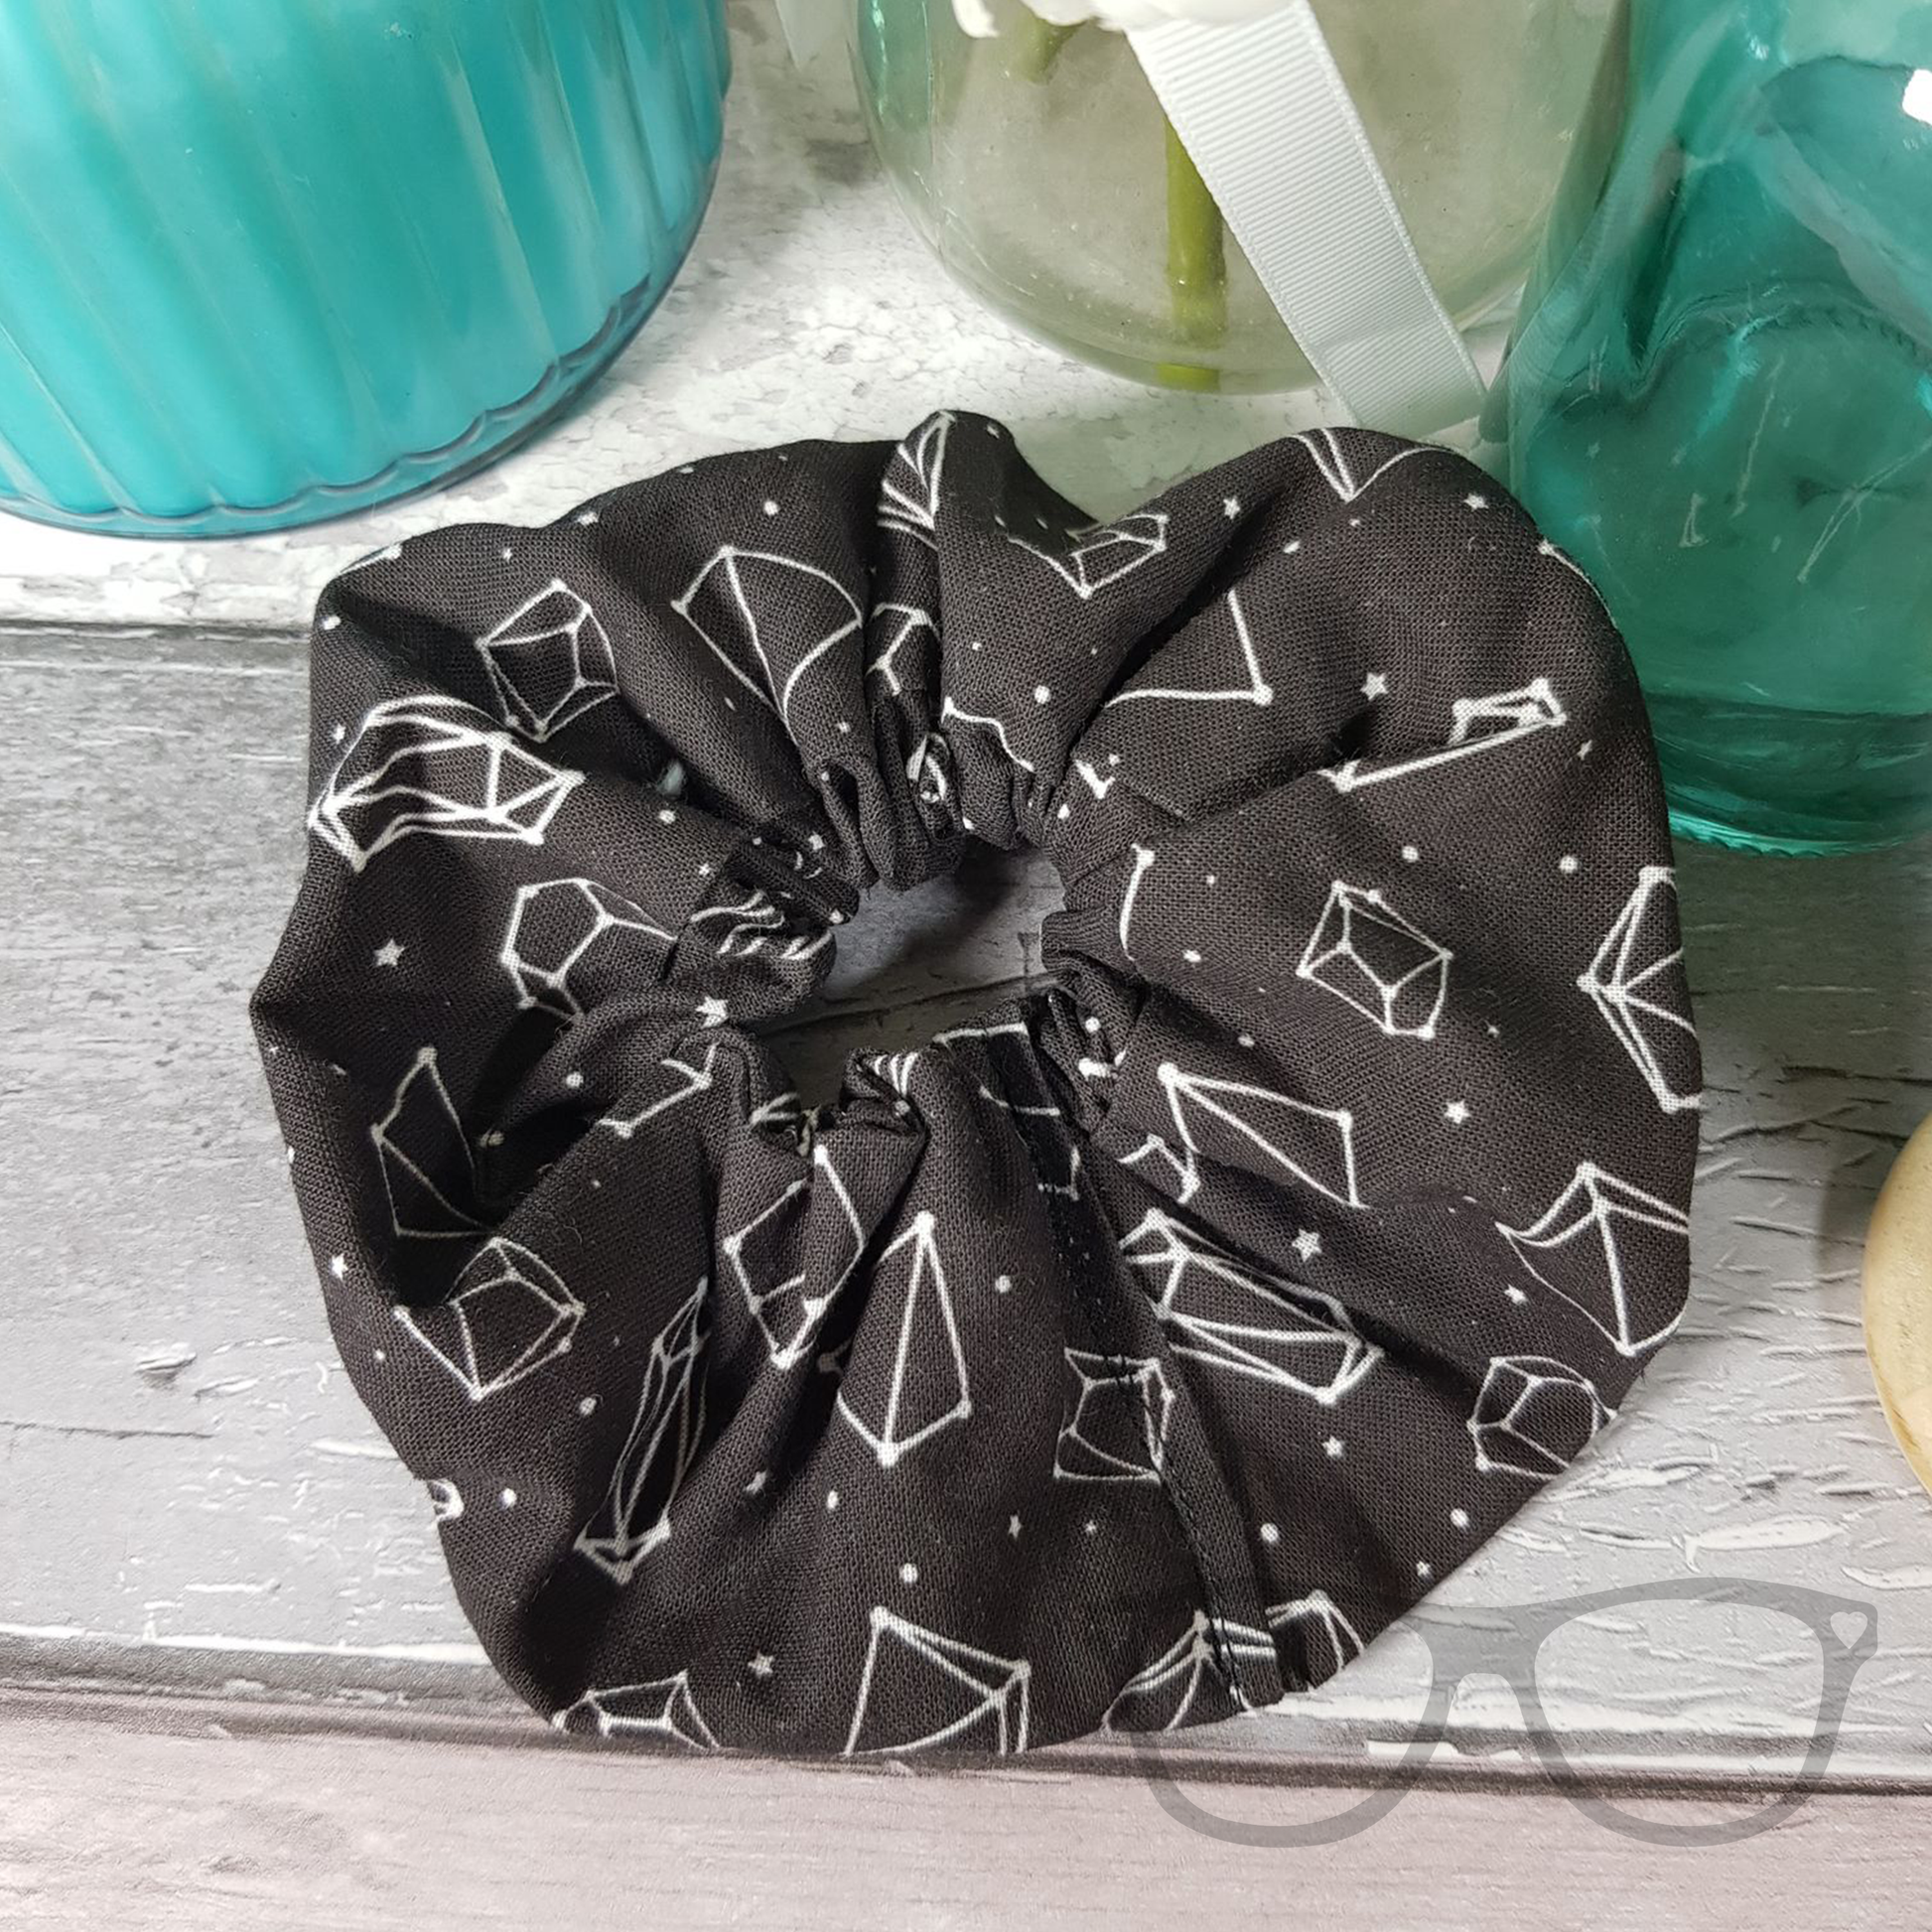 Hair Scrunchie for geeks, black hair scrunchie with white Dice constellation design. Made in house,